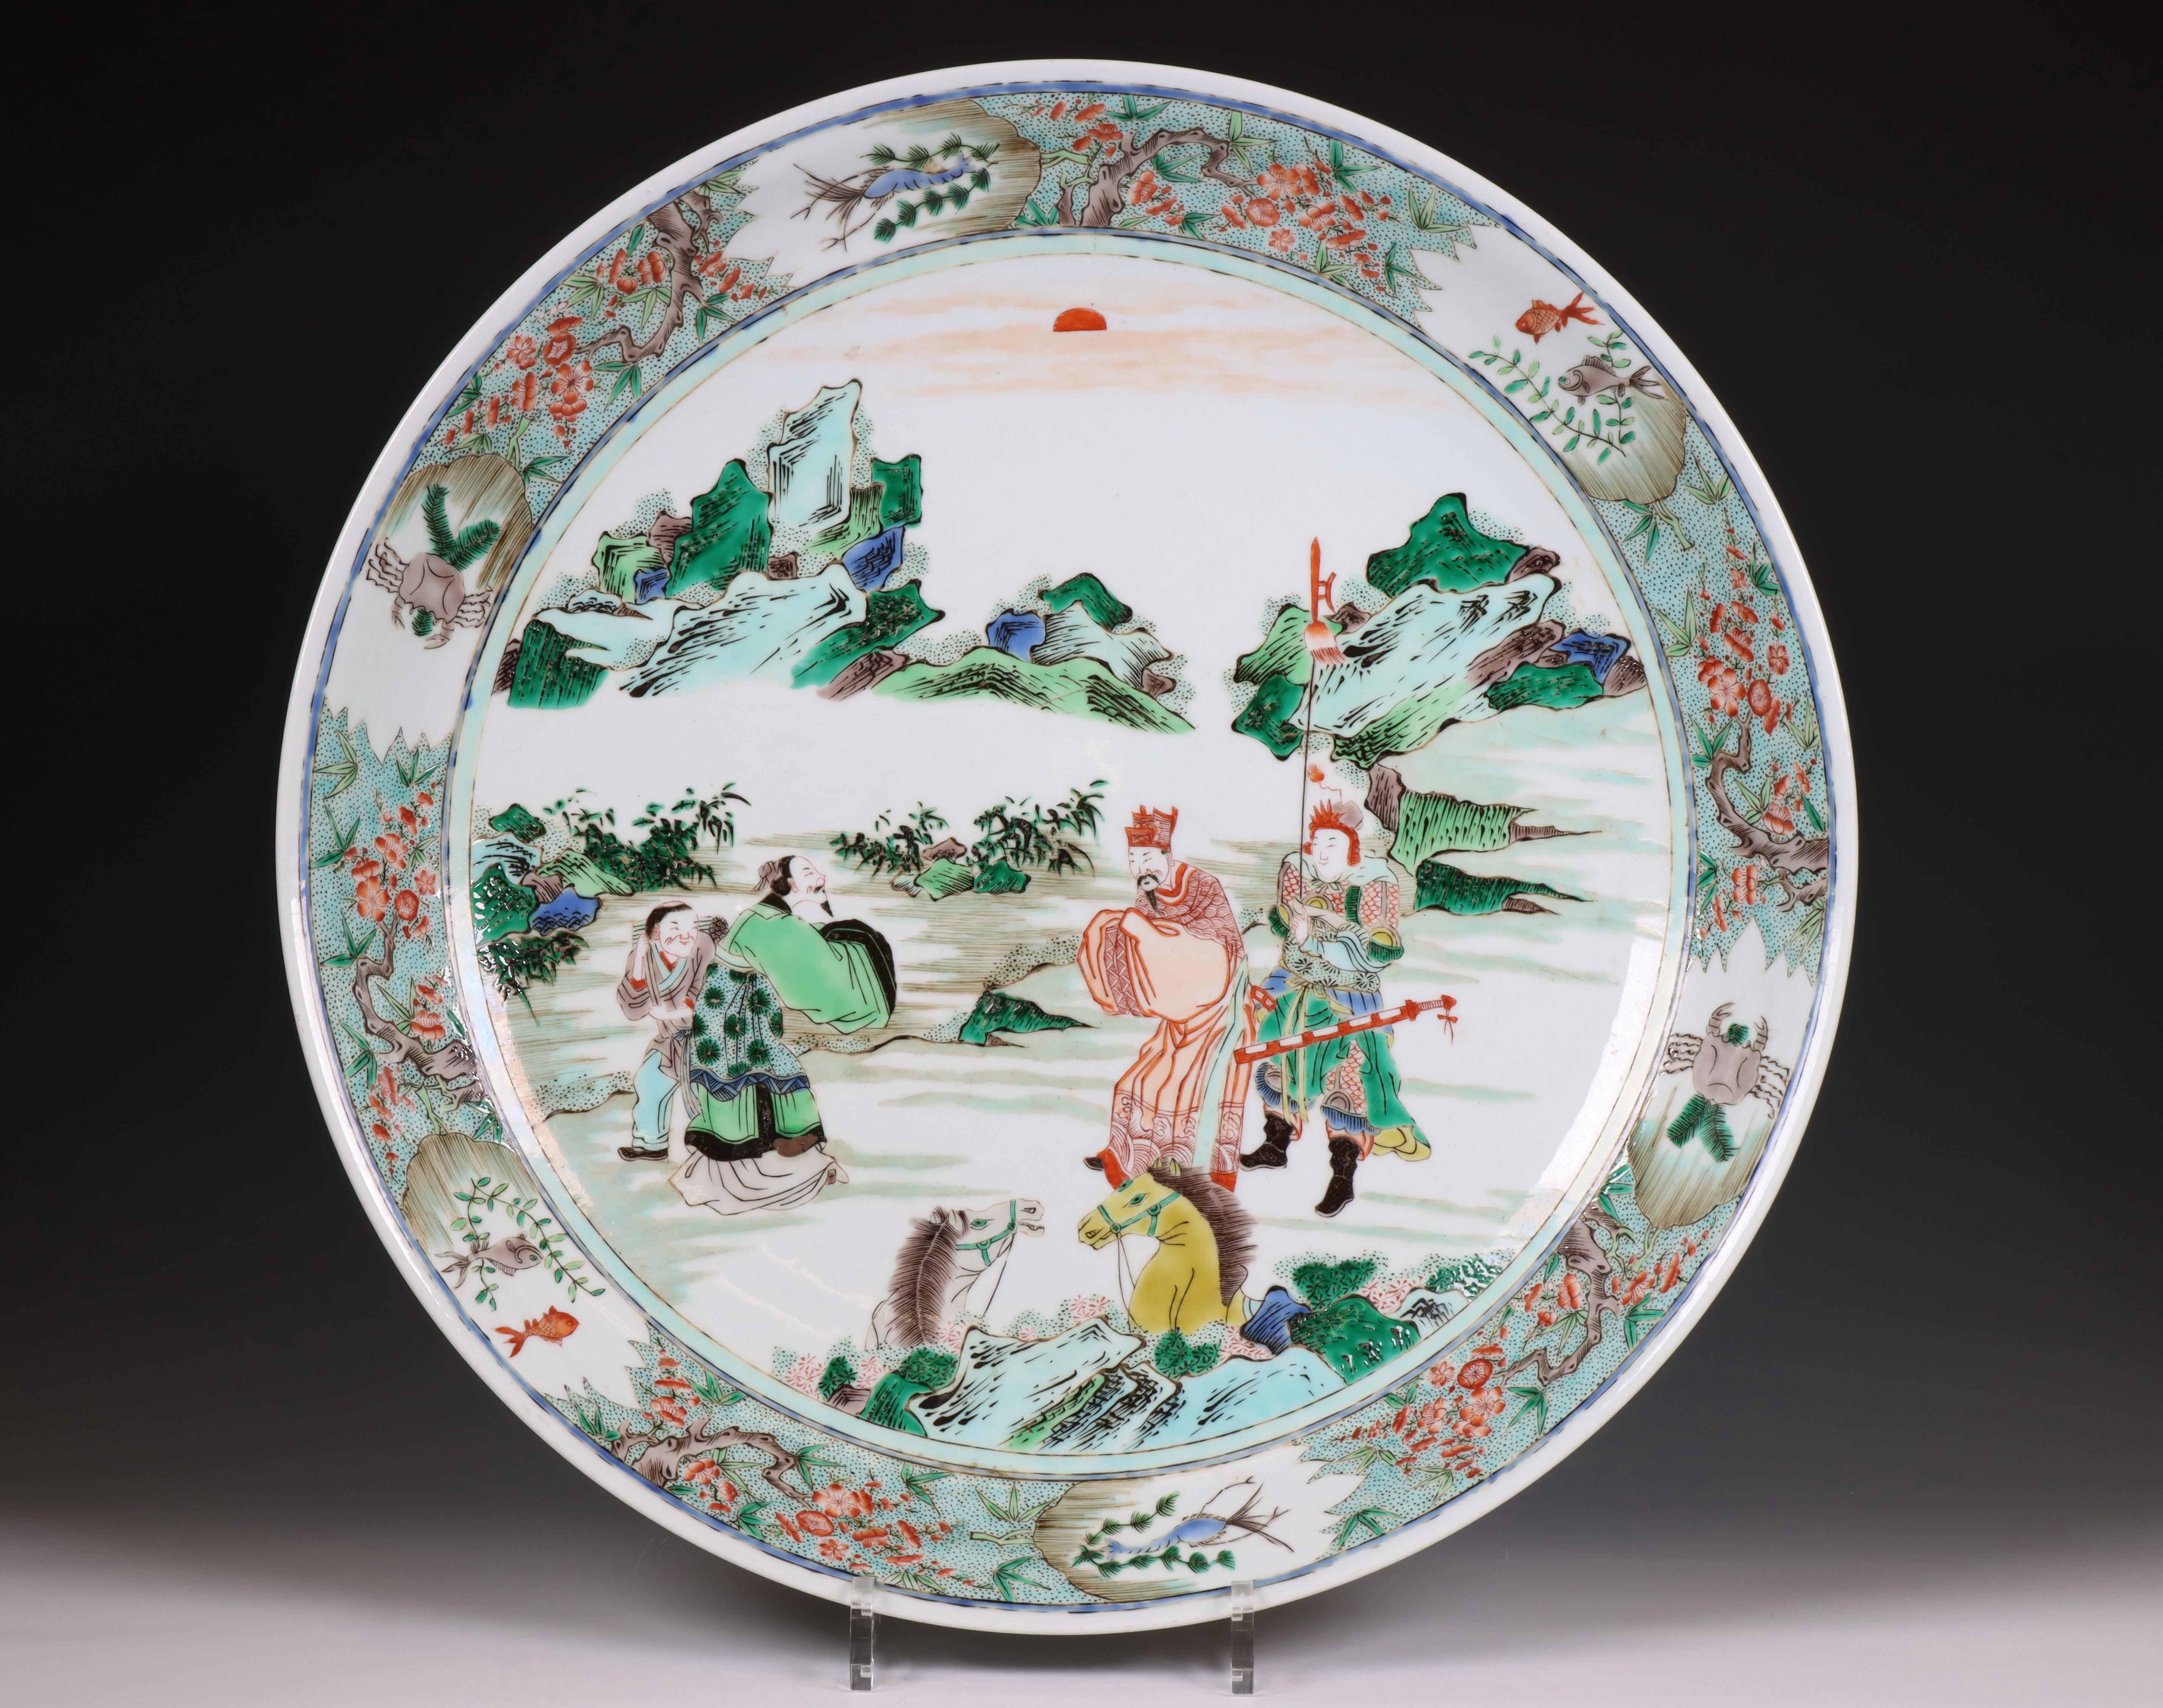 China, a famille verte porcelain dish, 20th century,